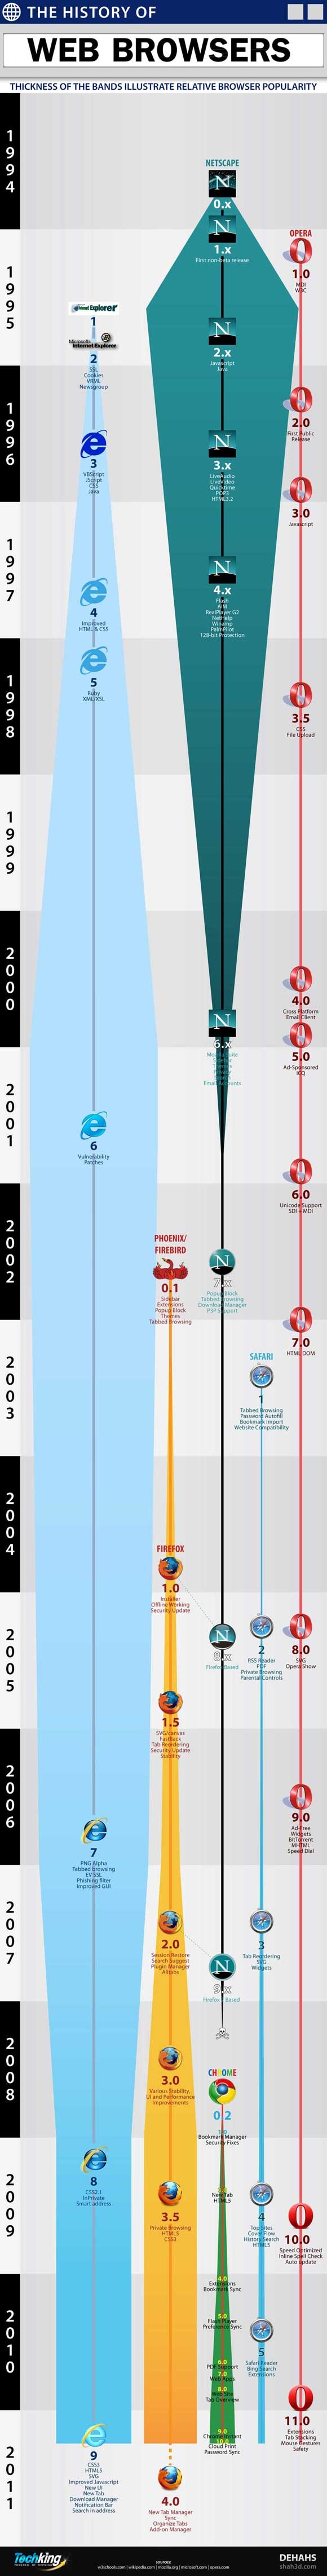 The-History-of-Web-Browsers